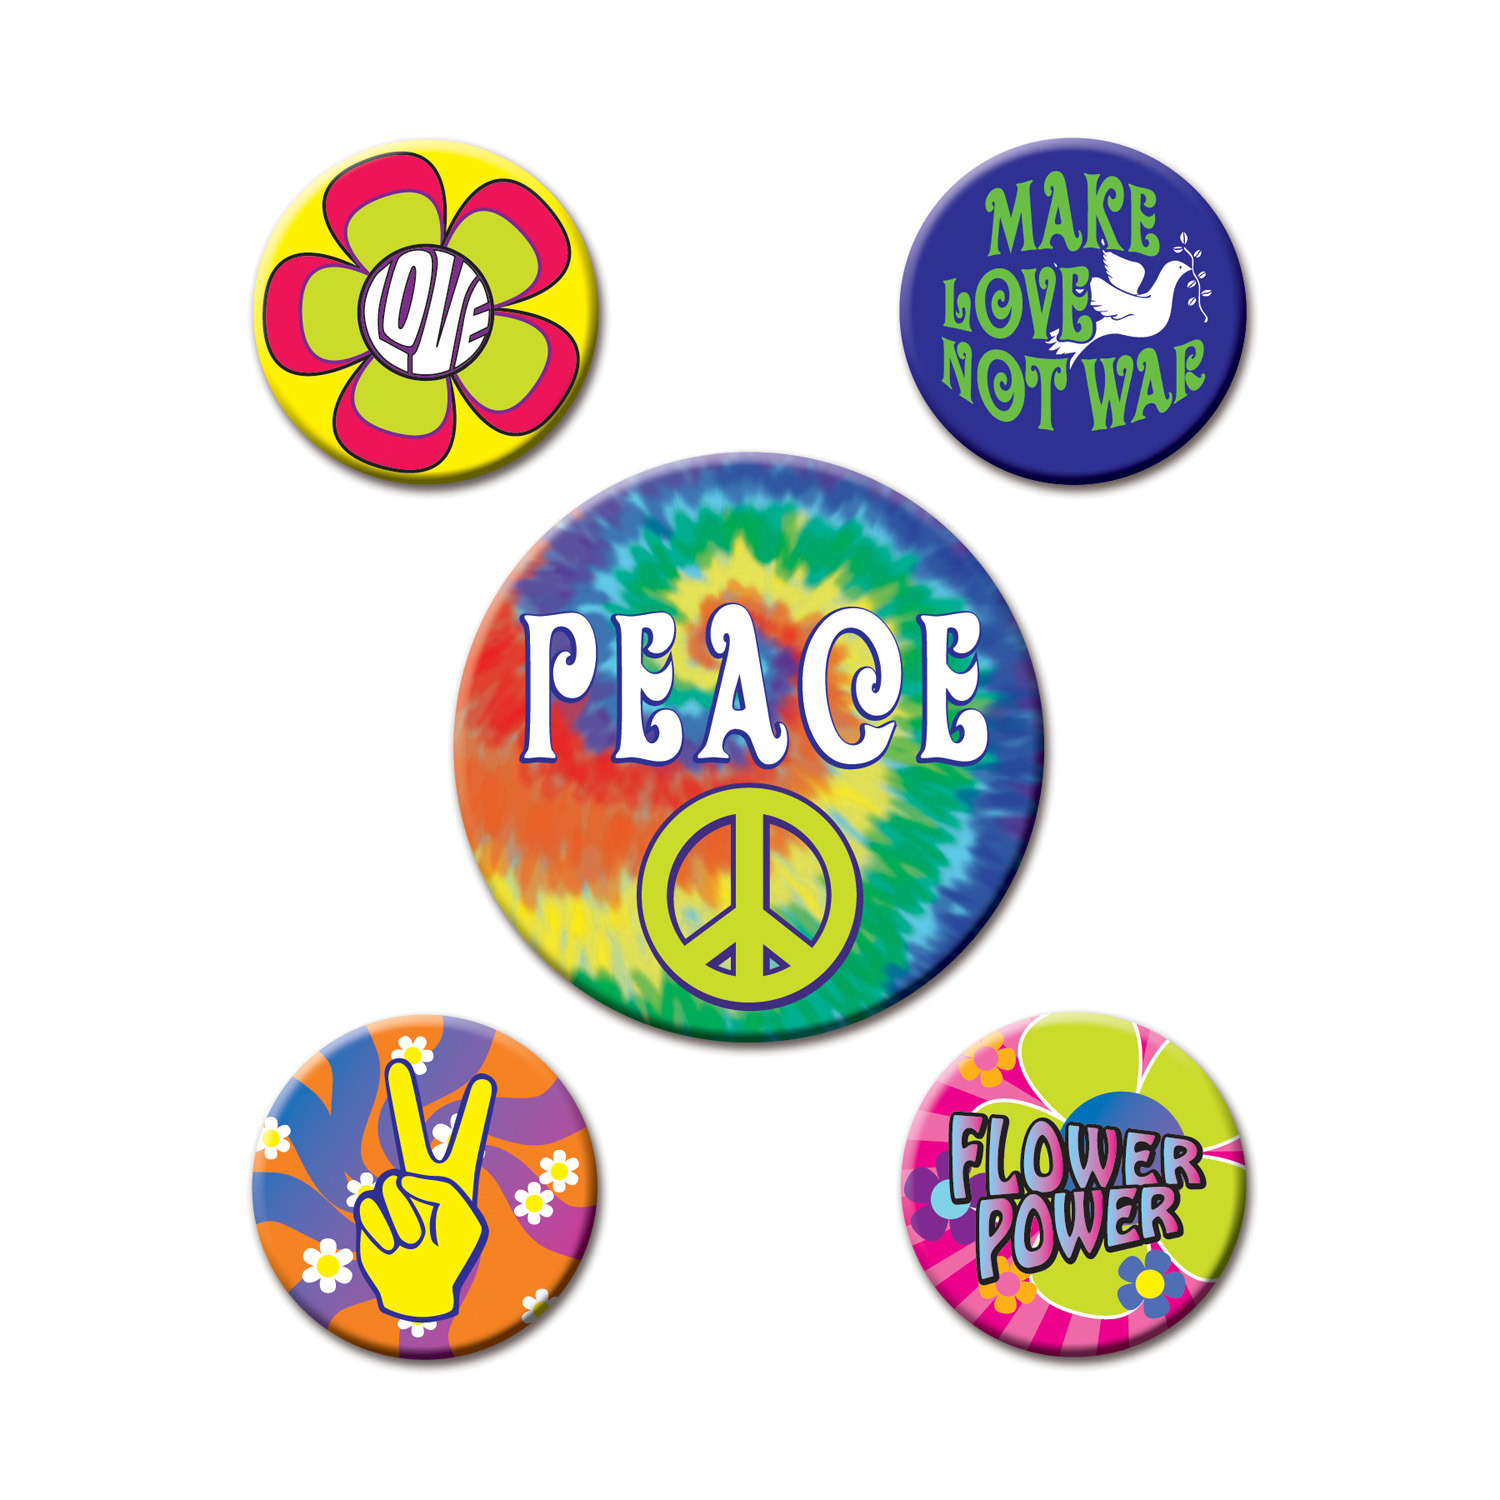 1960s peace buttons that are tie-dye 